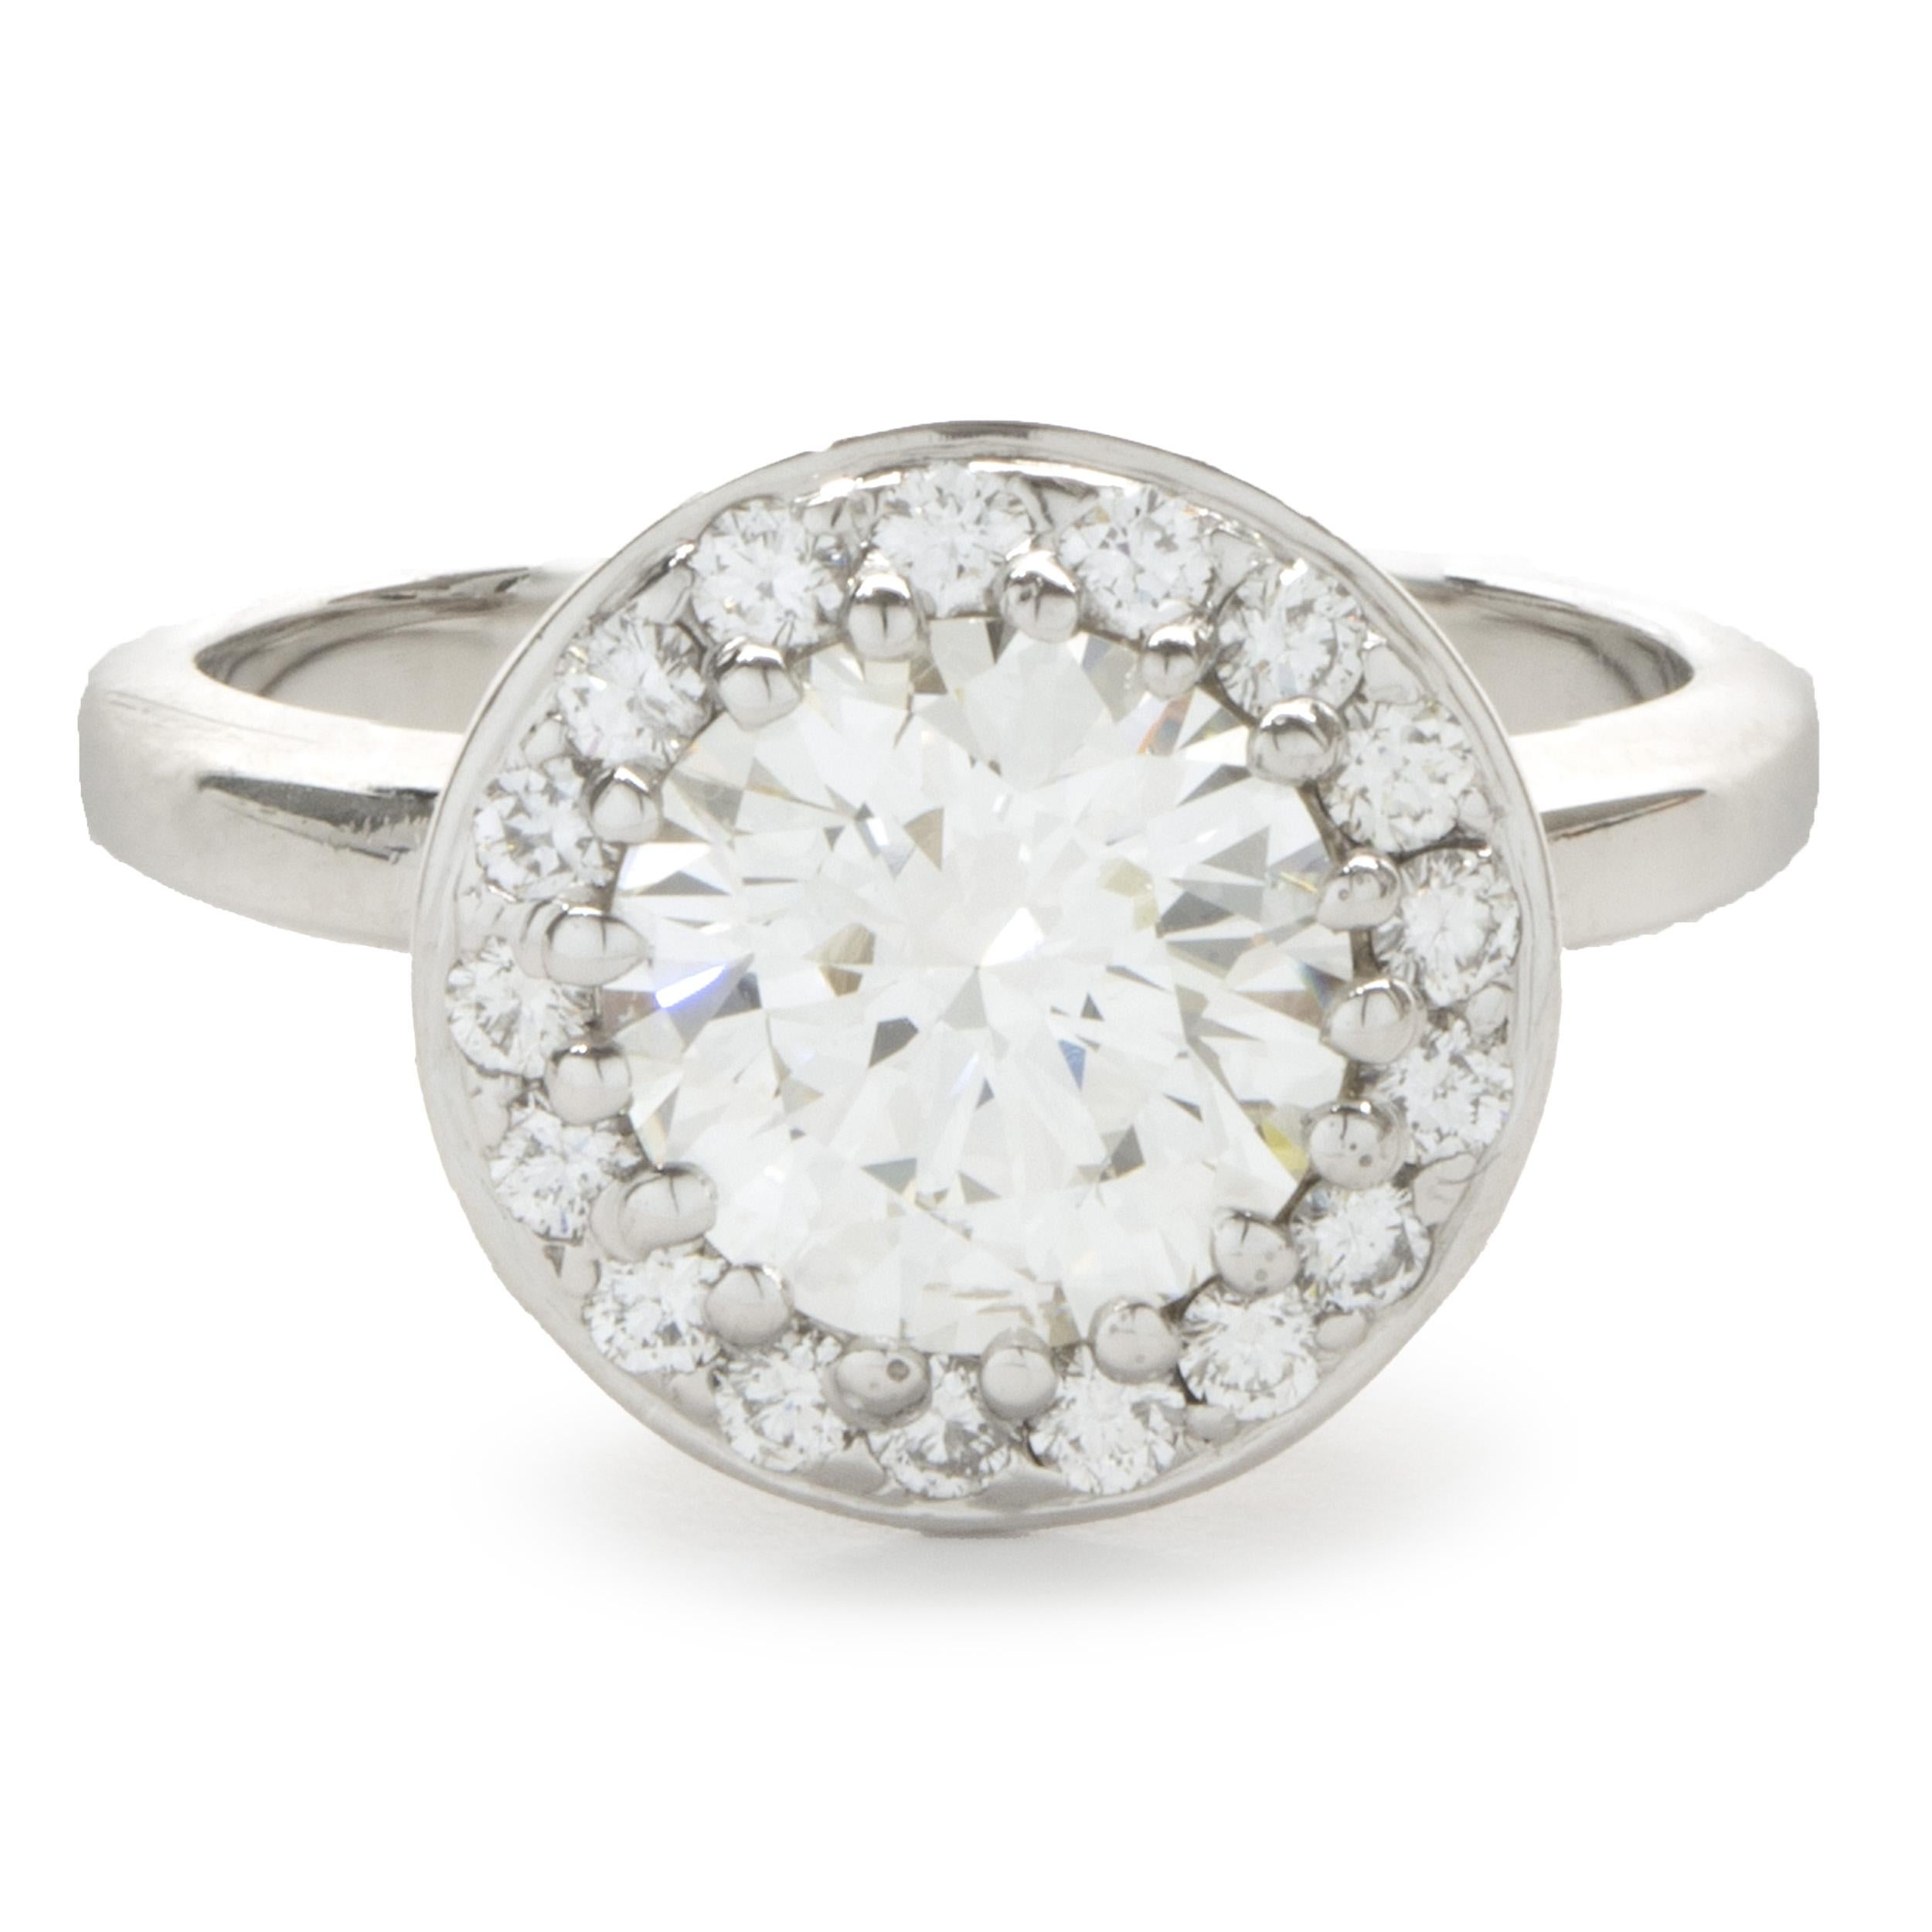 What is a brilliant cut diamond ring?